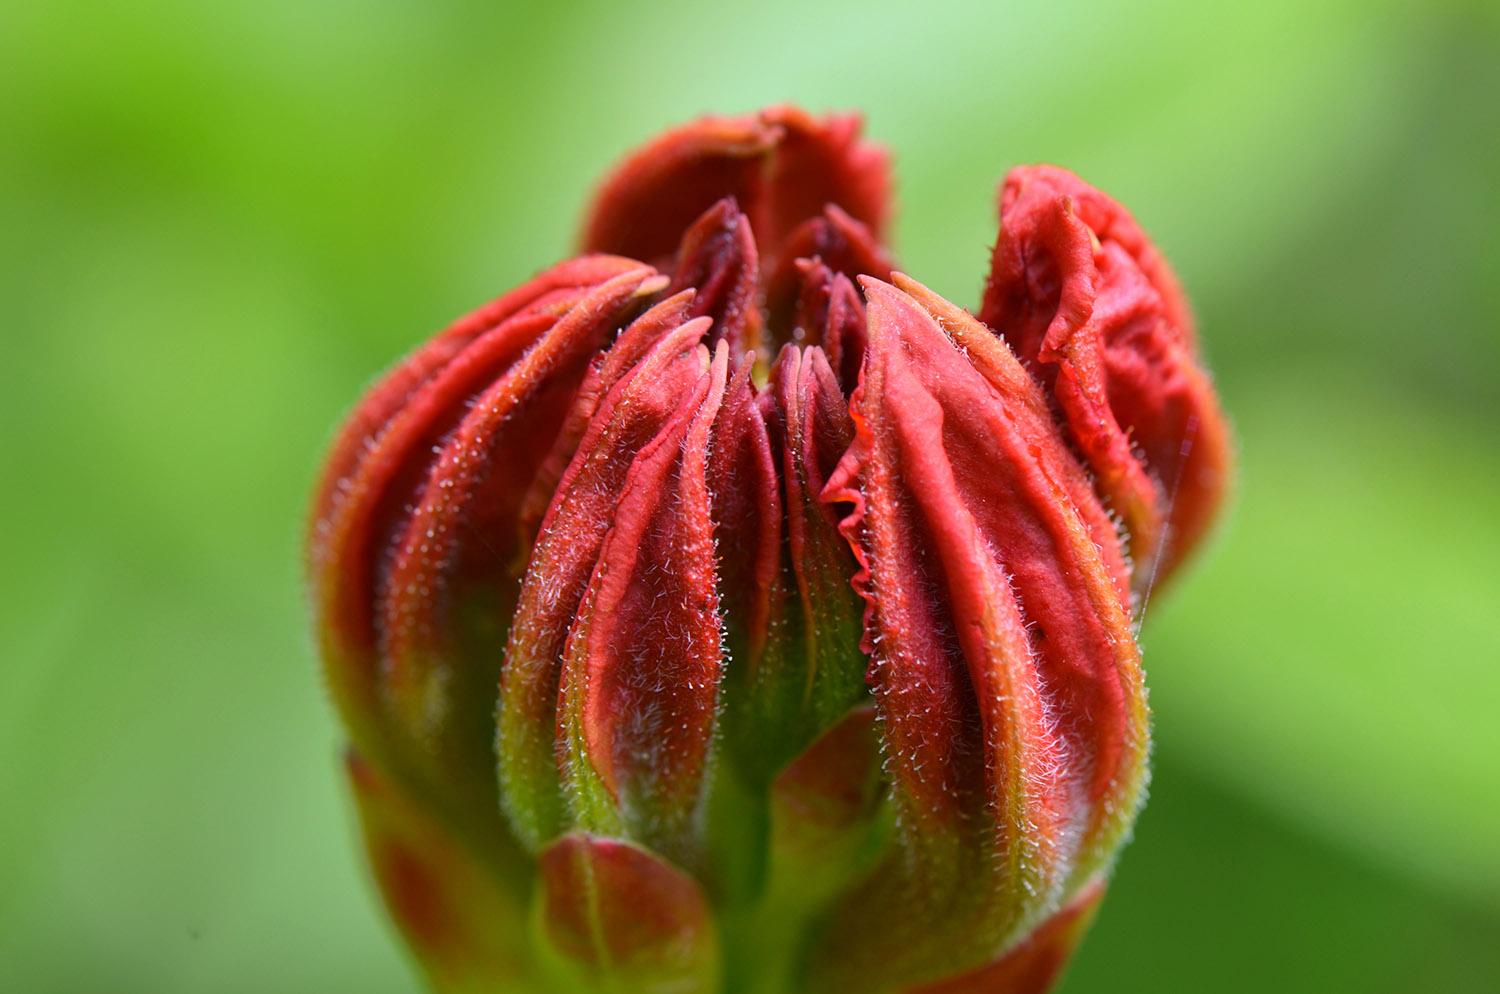 A red flower bud starting to open